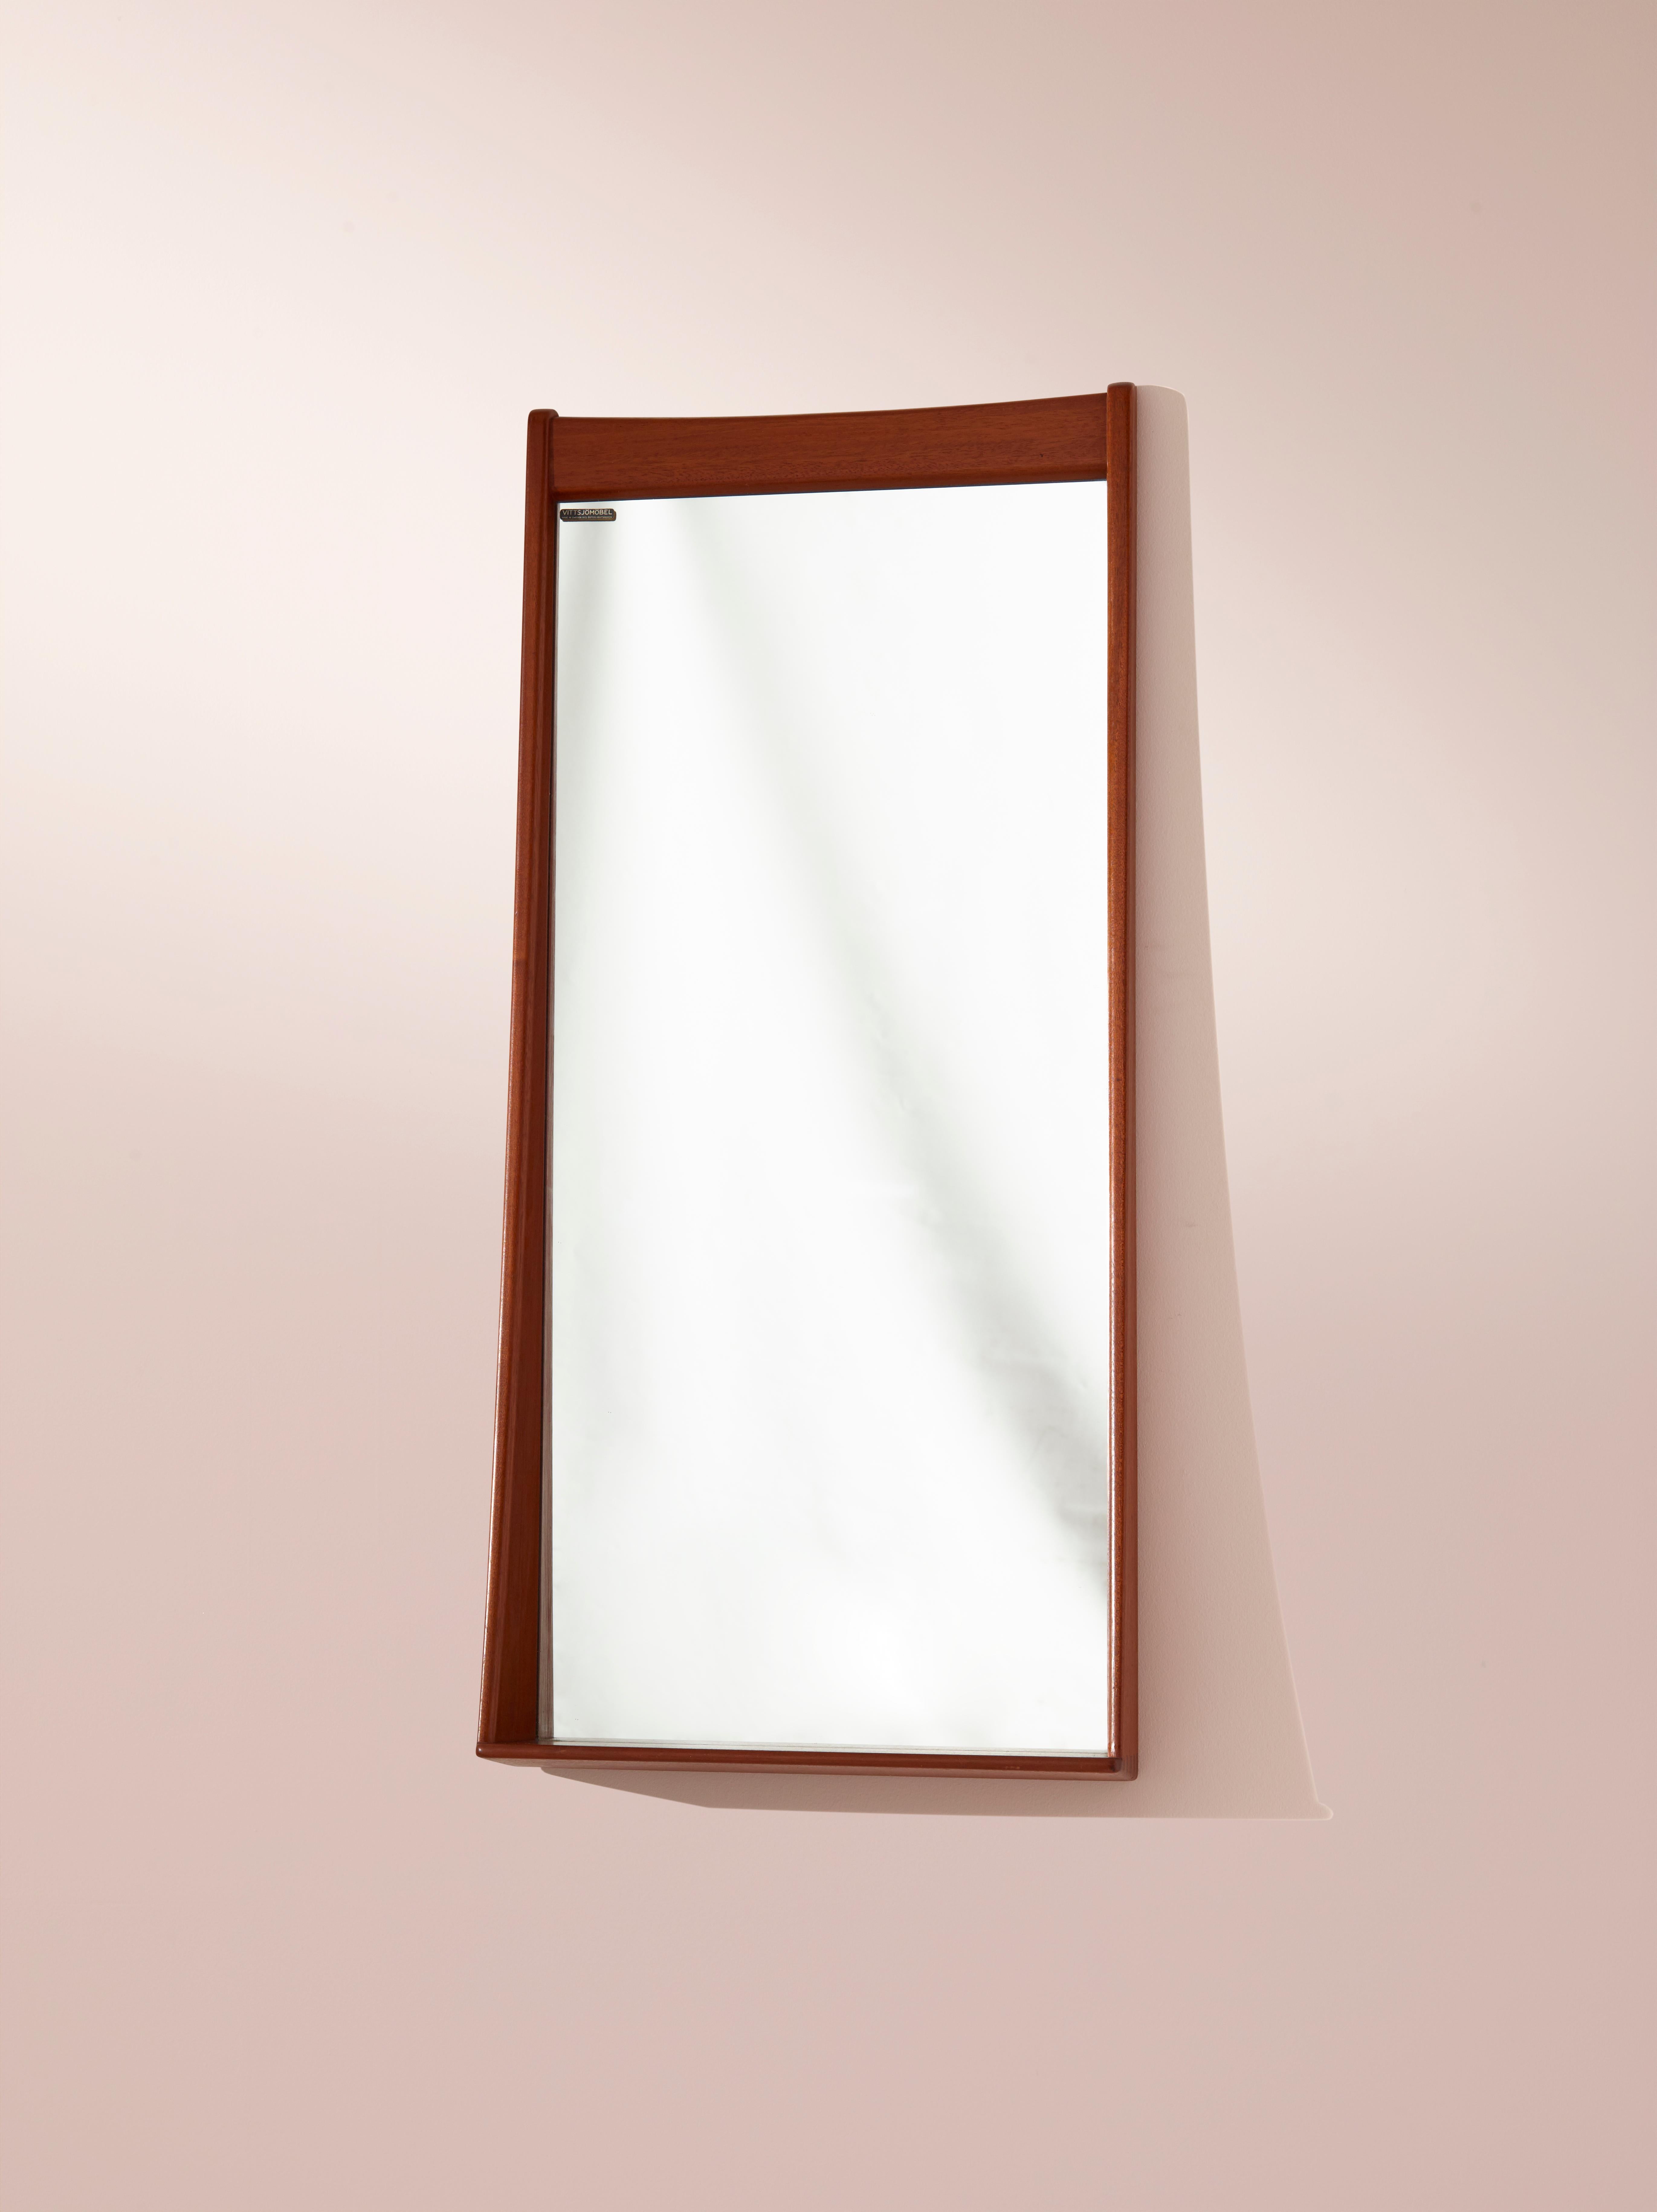 This 1950s Swedish wall mirror is a unique and beautiful example of Scandinavian design. Designed by Östen Kristiansson and manufactured by Vittsjö Möbel (Luxus), this mirror showcases the high-quality craftsmanship and minimalist aesthetic that